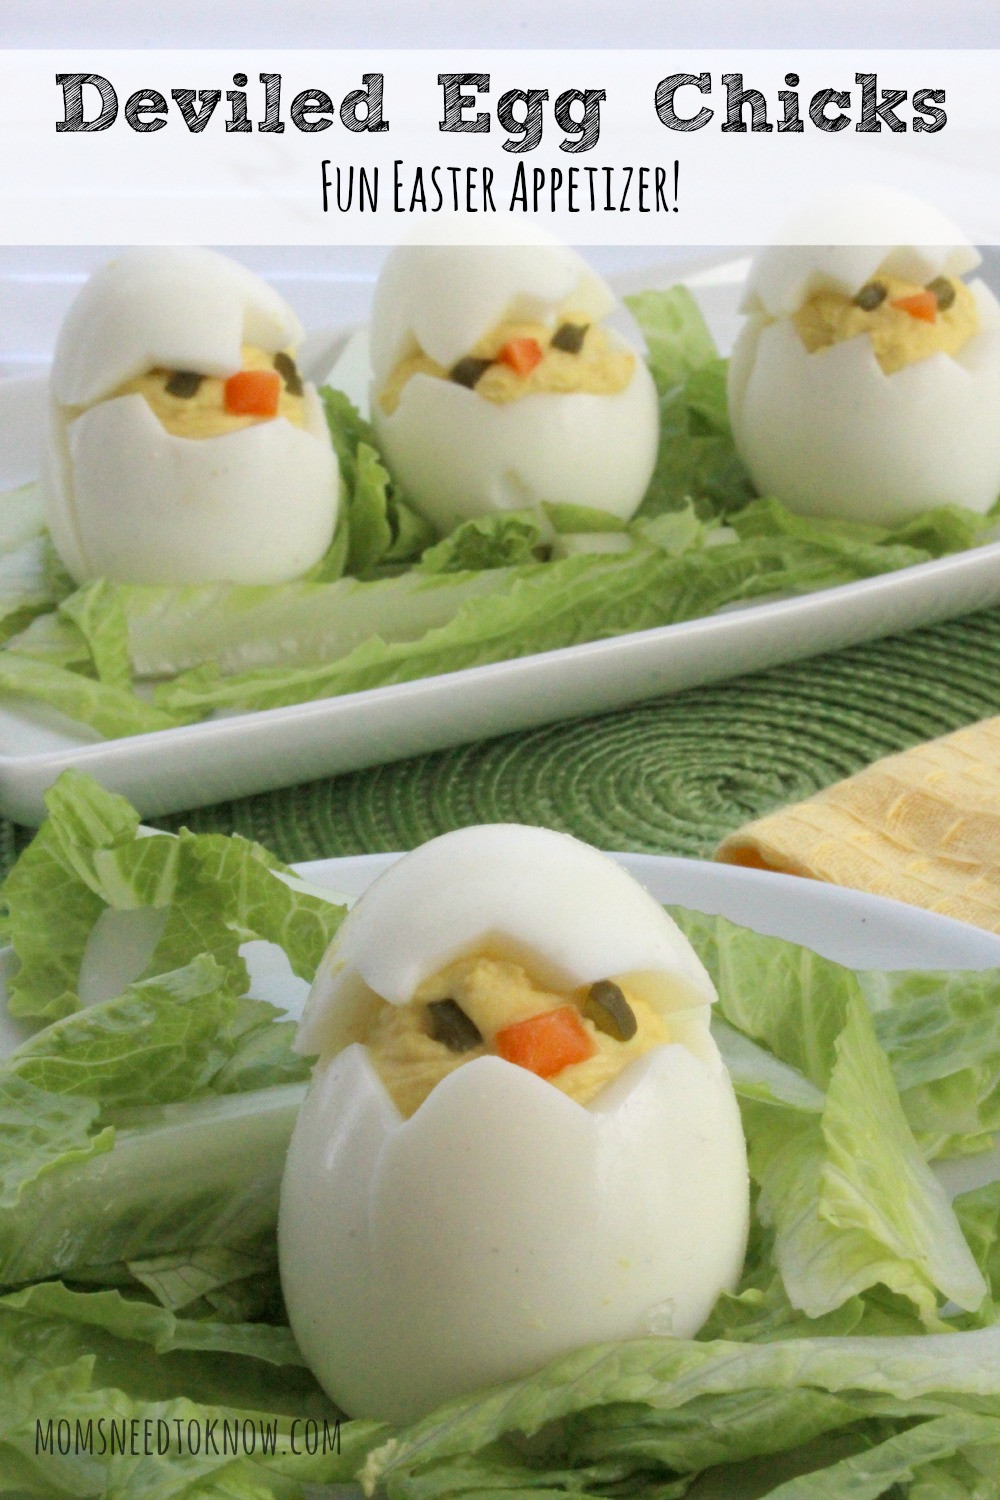 Cute Easter Appetizers
 How to Make Deviled Egg Chicks